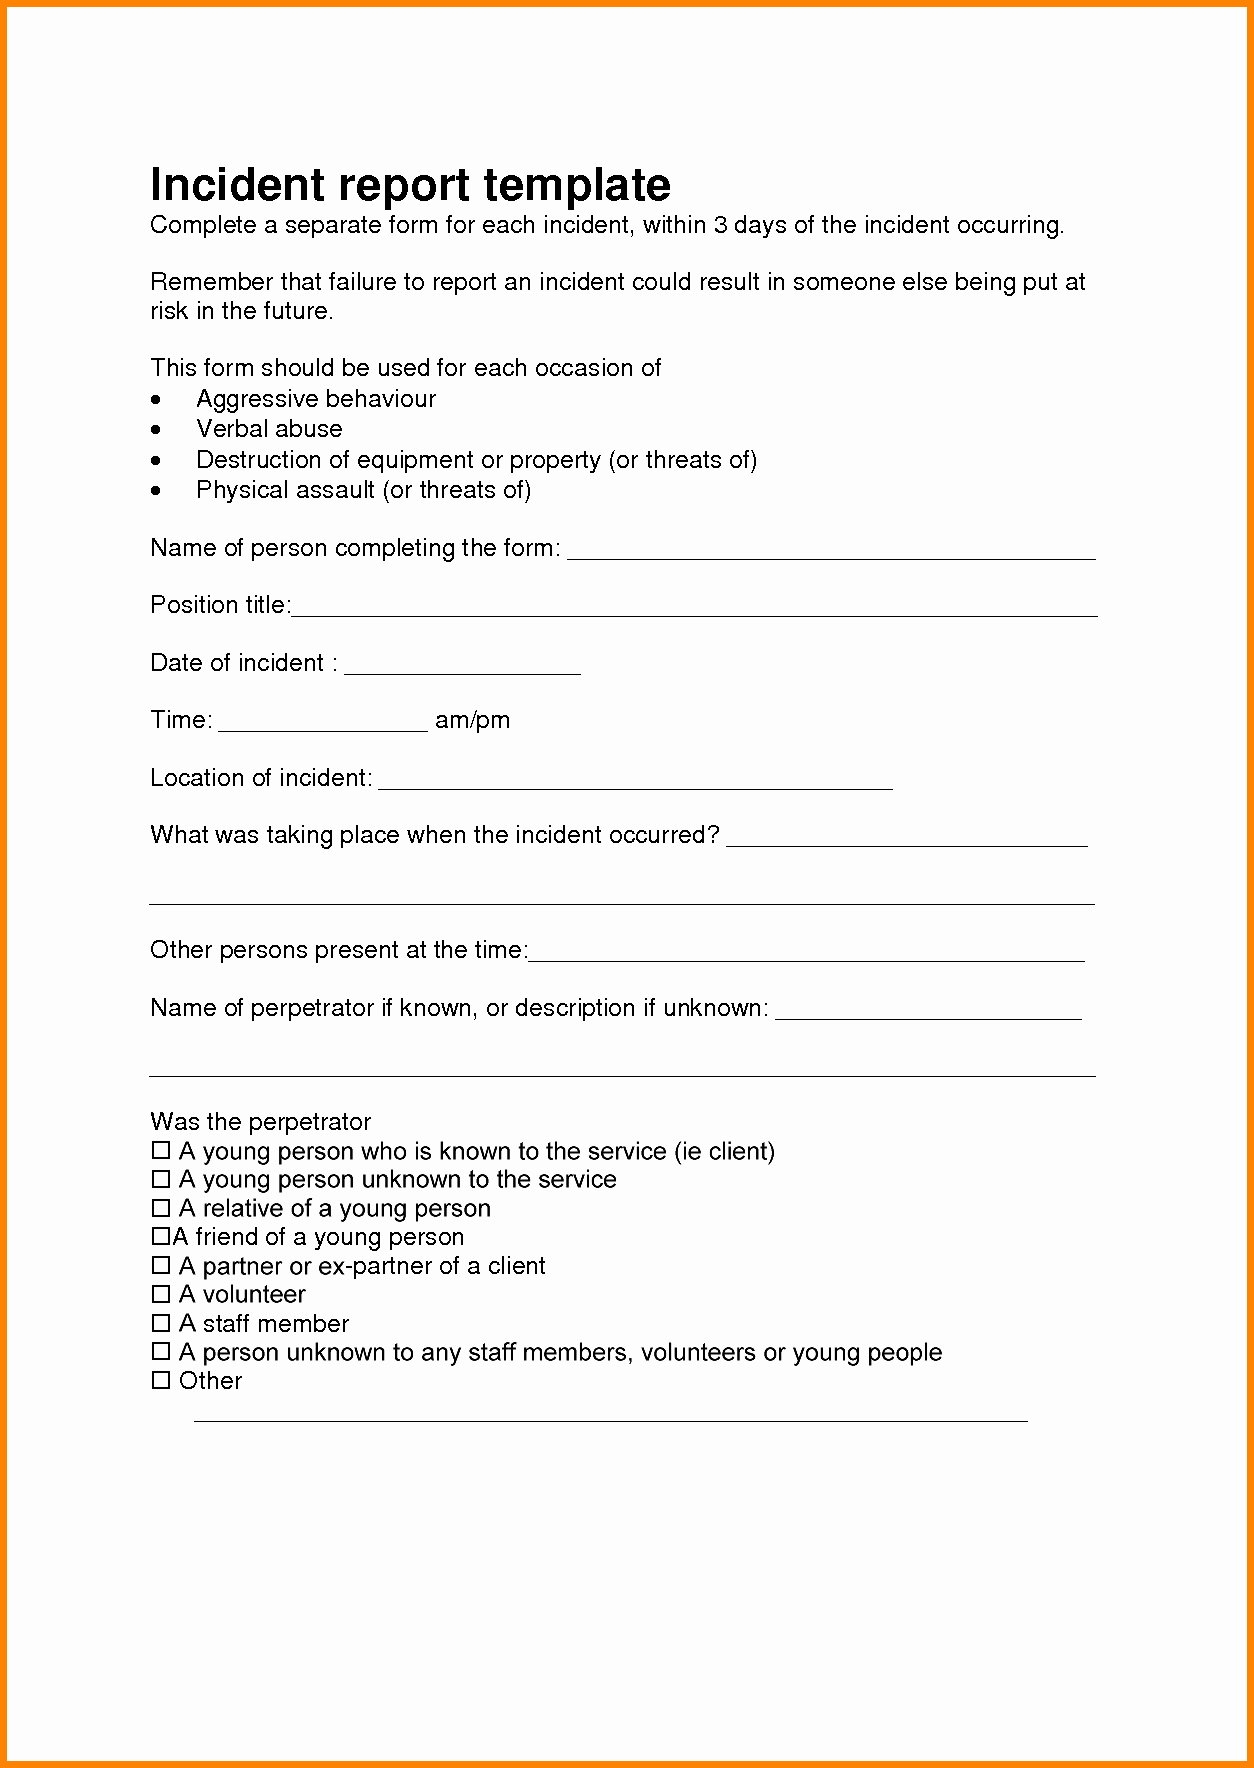 Incident Report form Template Best Of Incident Report Template Microsoft Word